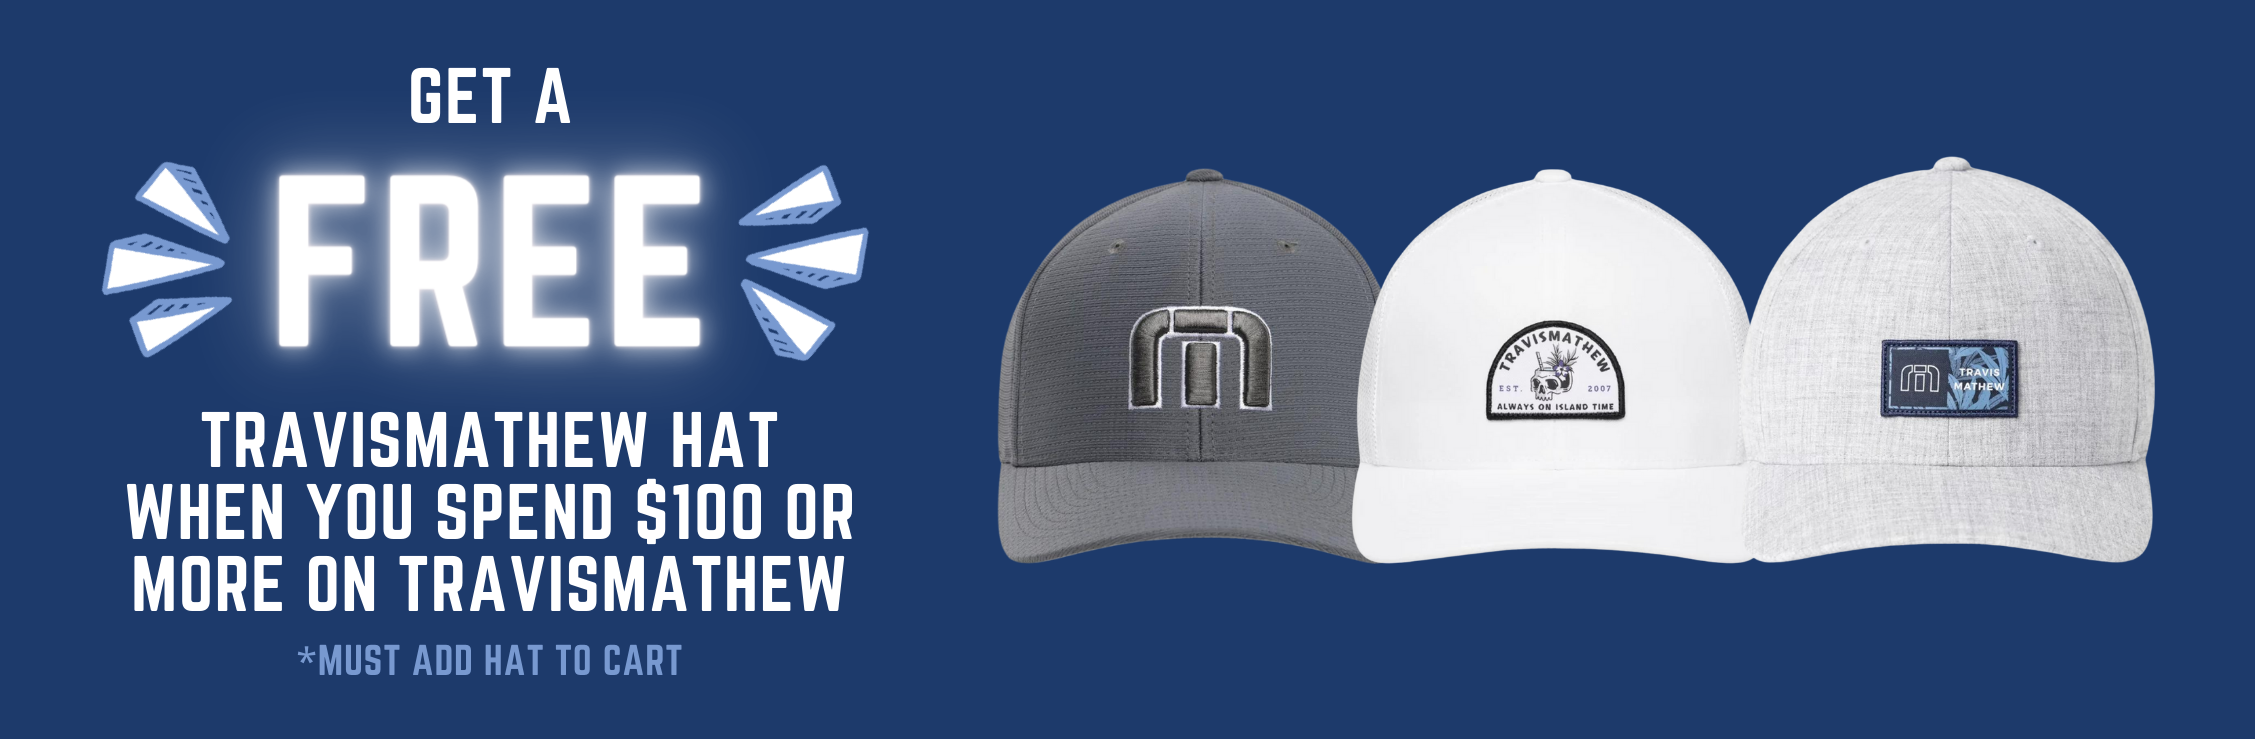 Receive a free TravisMathew hat with the purchase of $100 or more in TravisMathew!